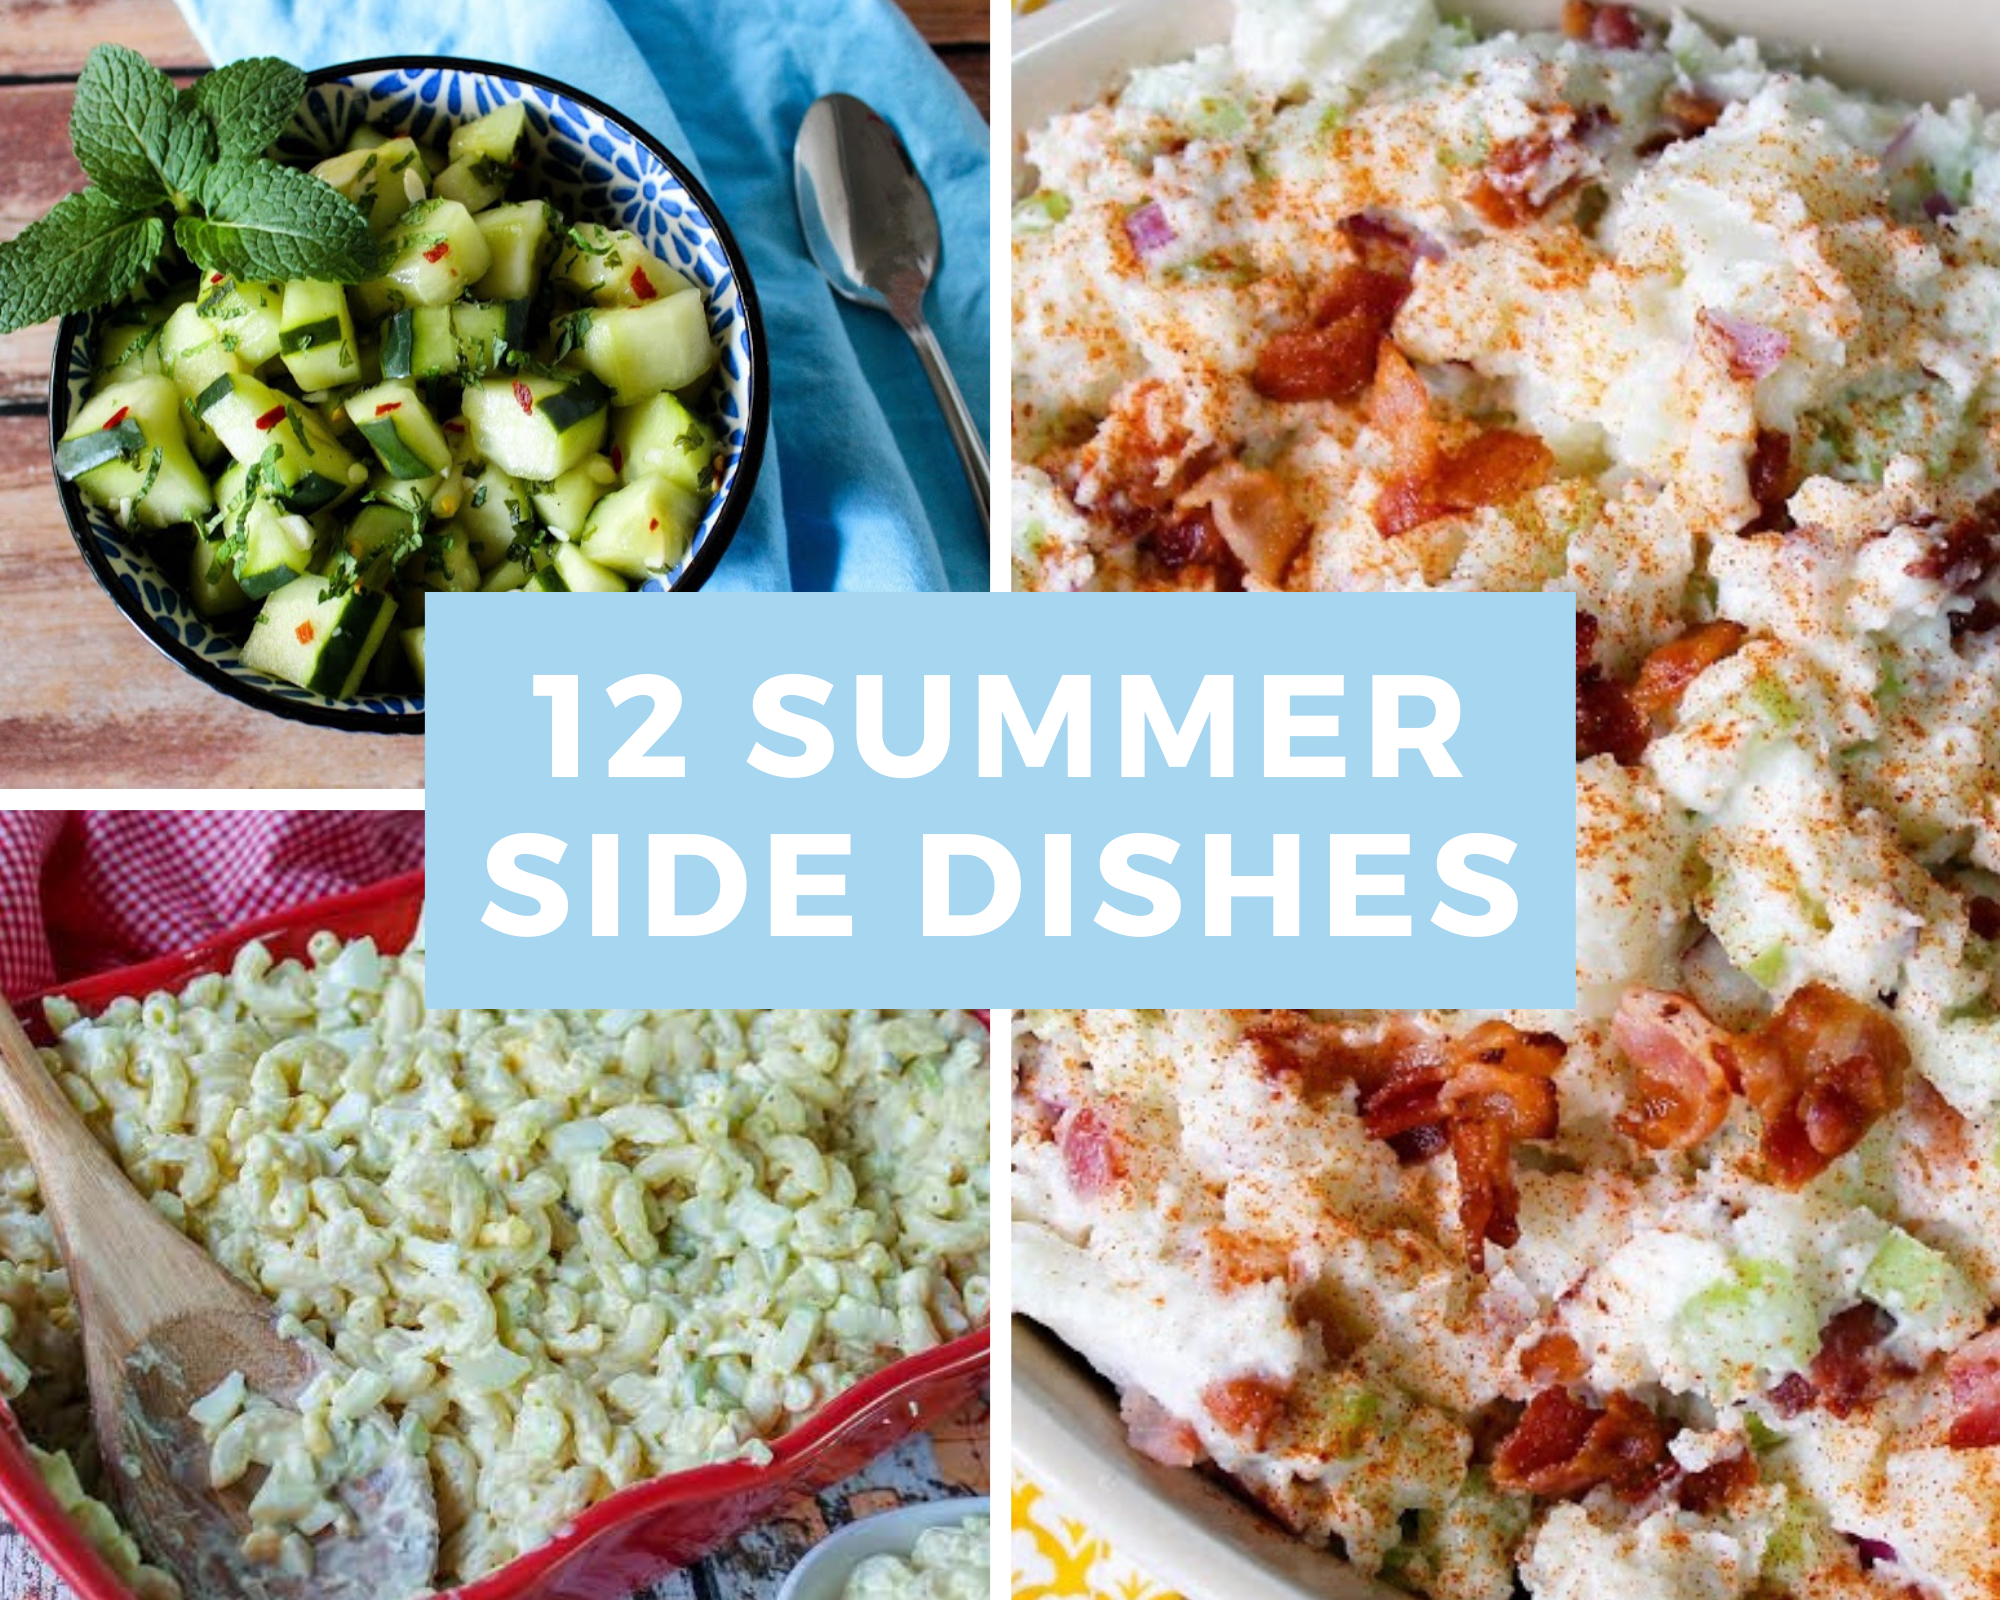 summer side dishes